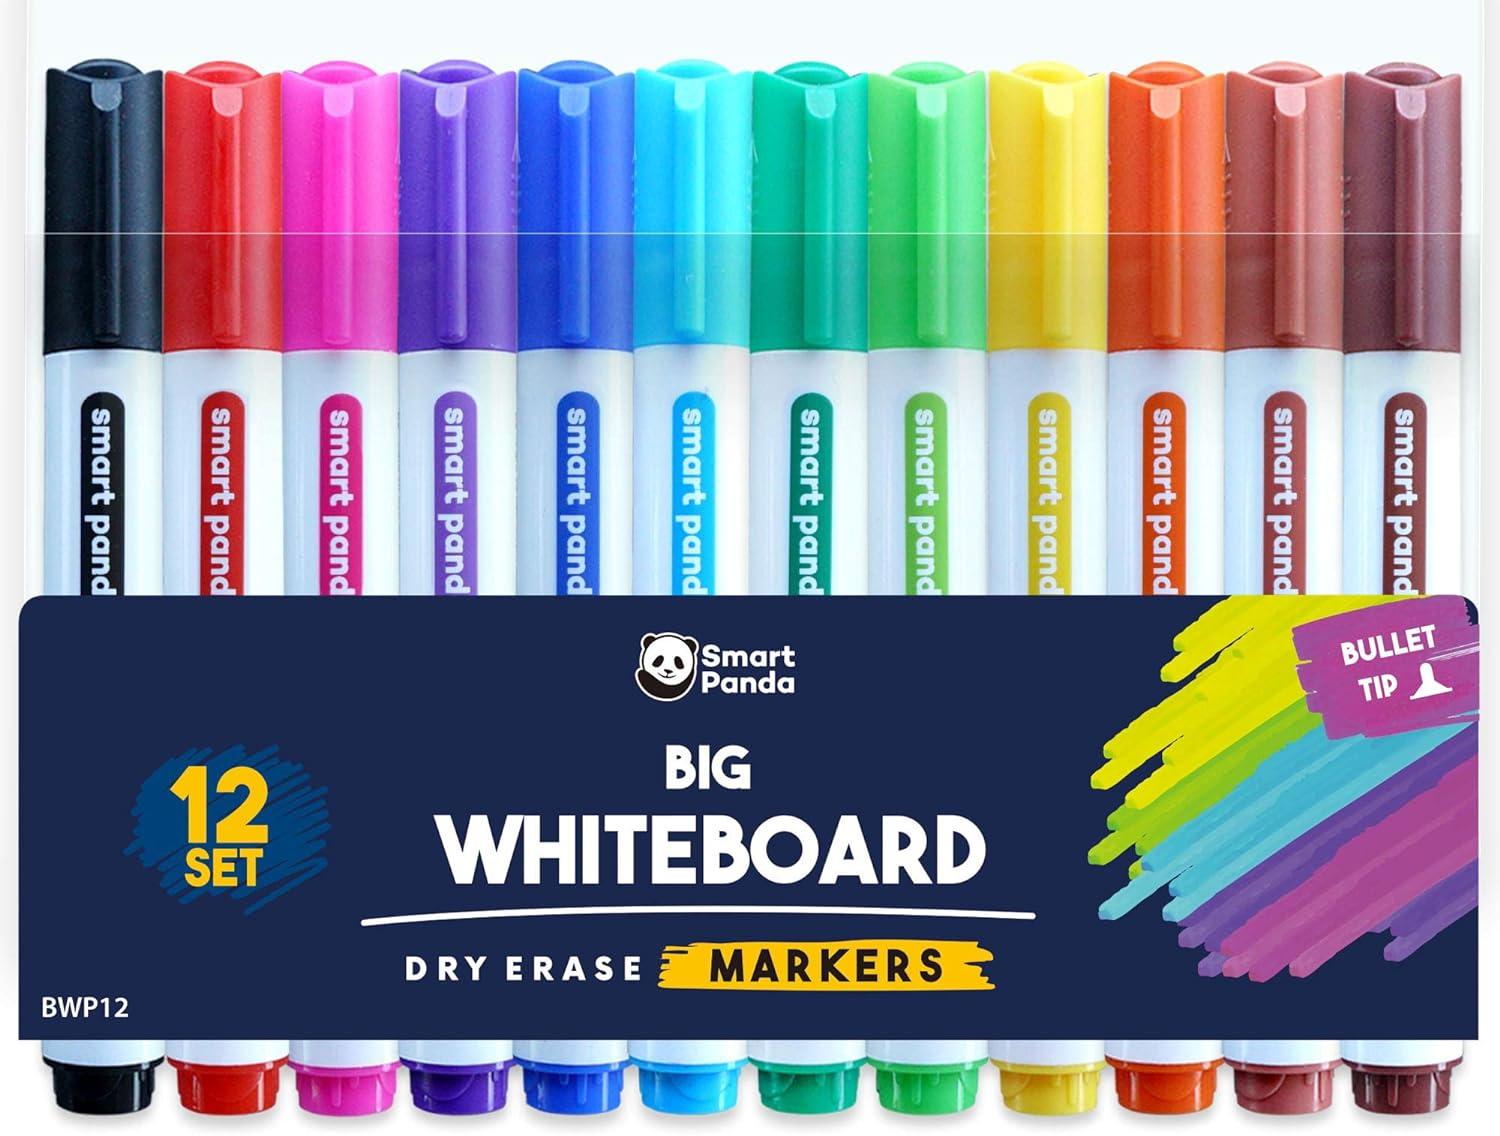 smart panda 12 big whiteboard pens – bullet tip whiteboard markers – dry erase markers perfect for home